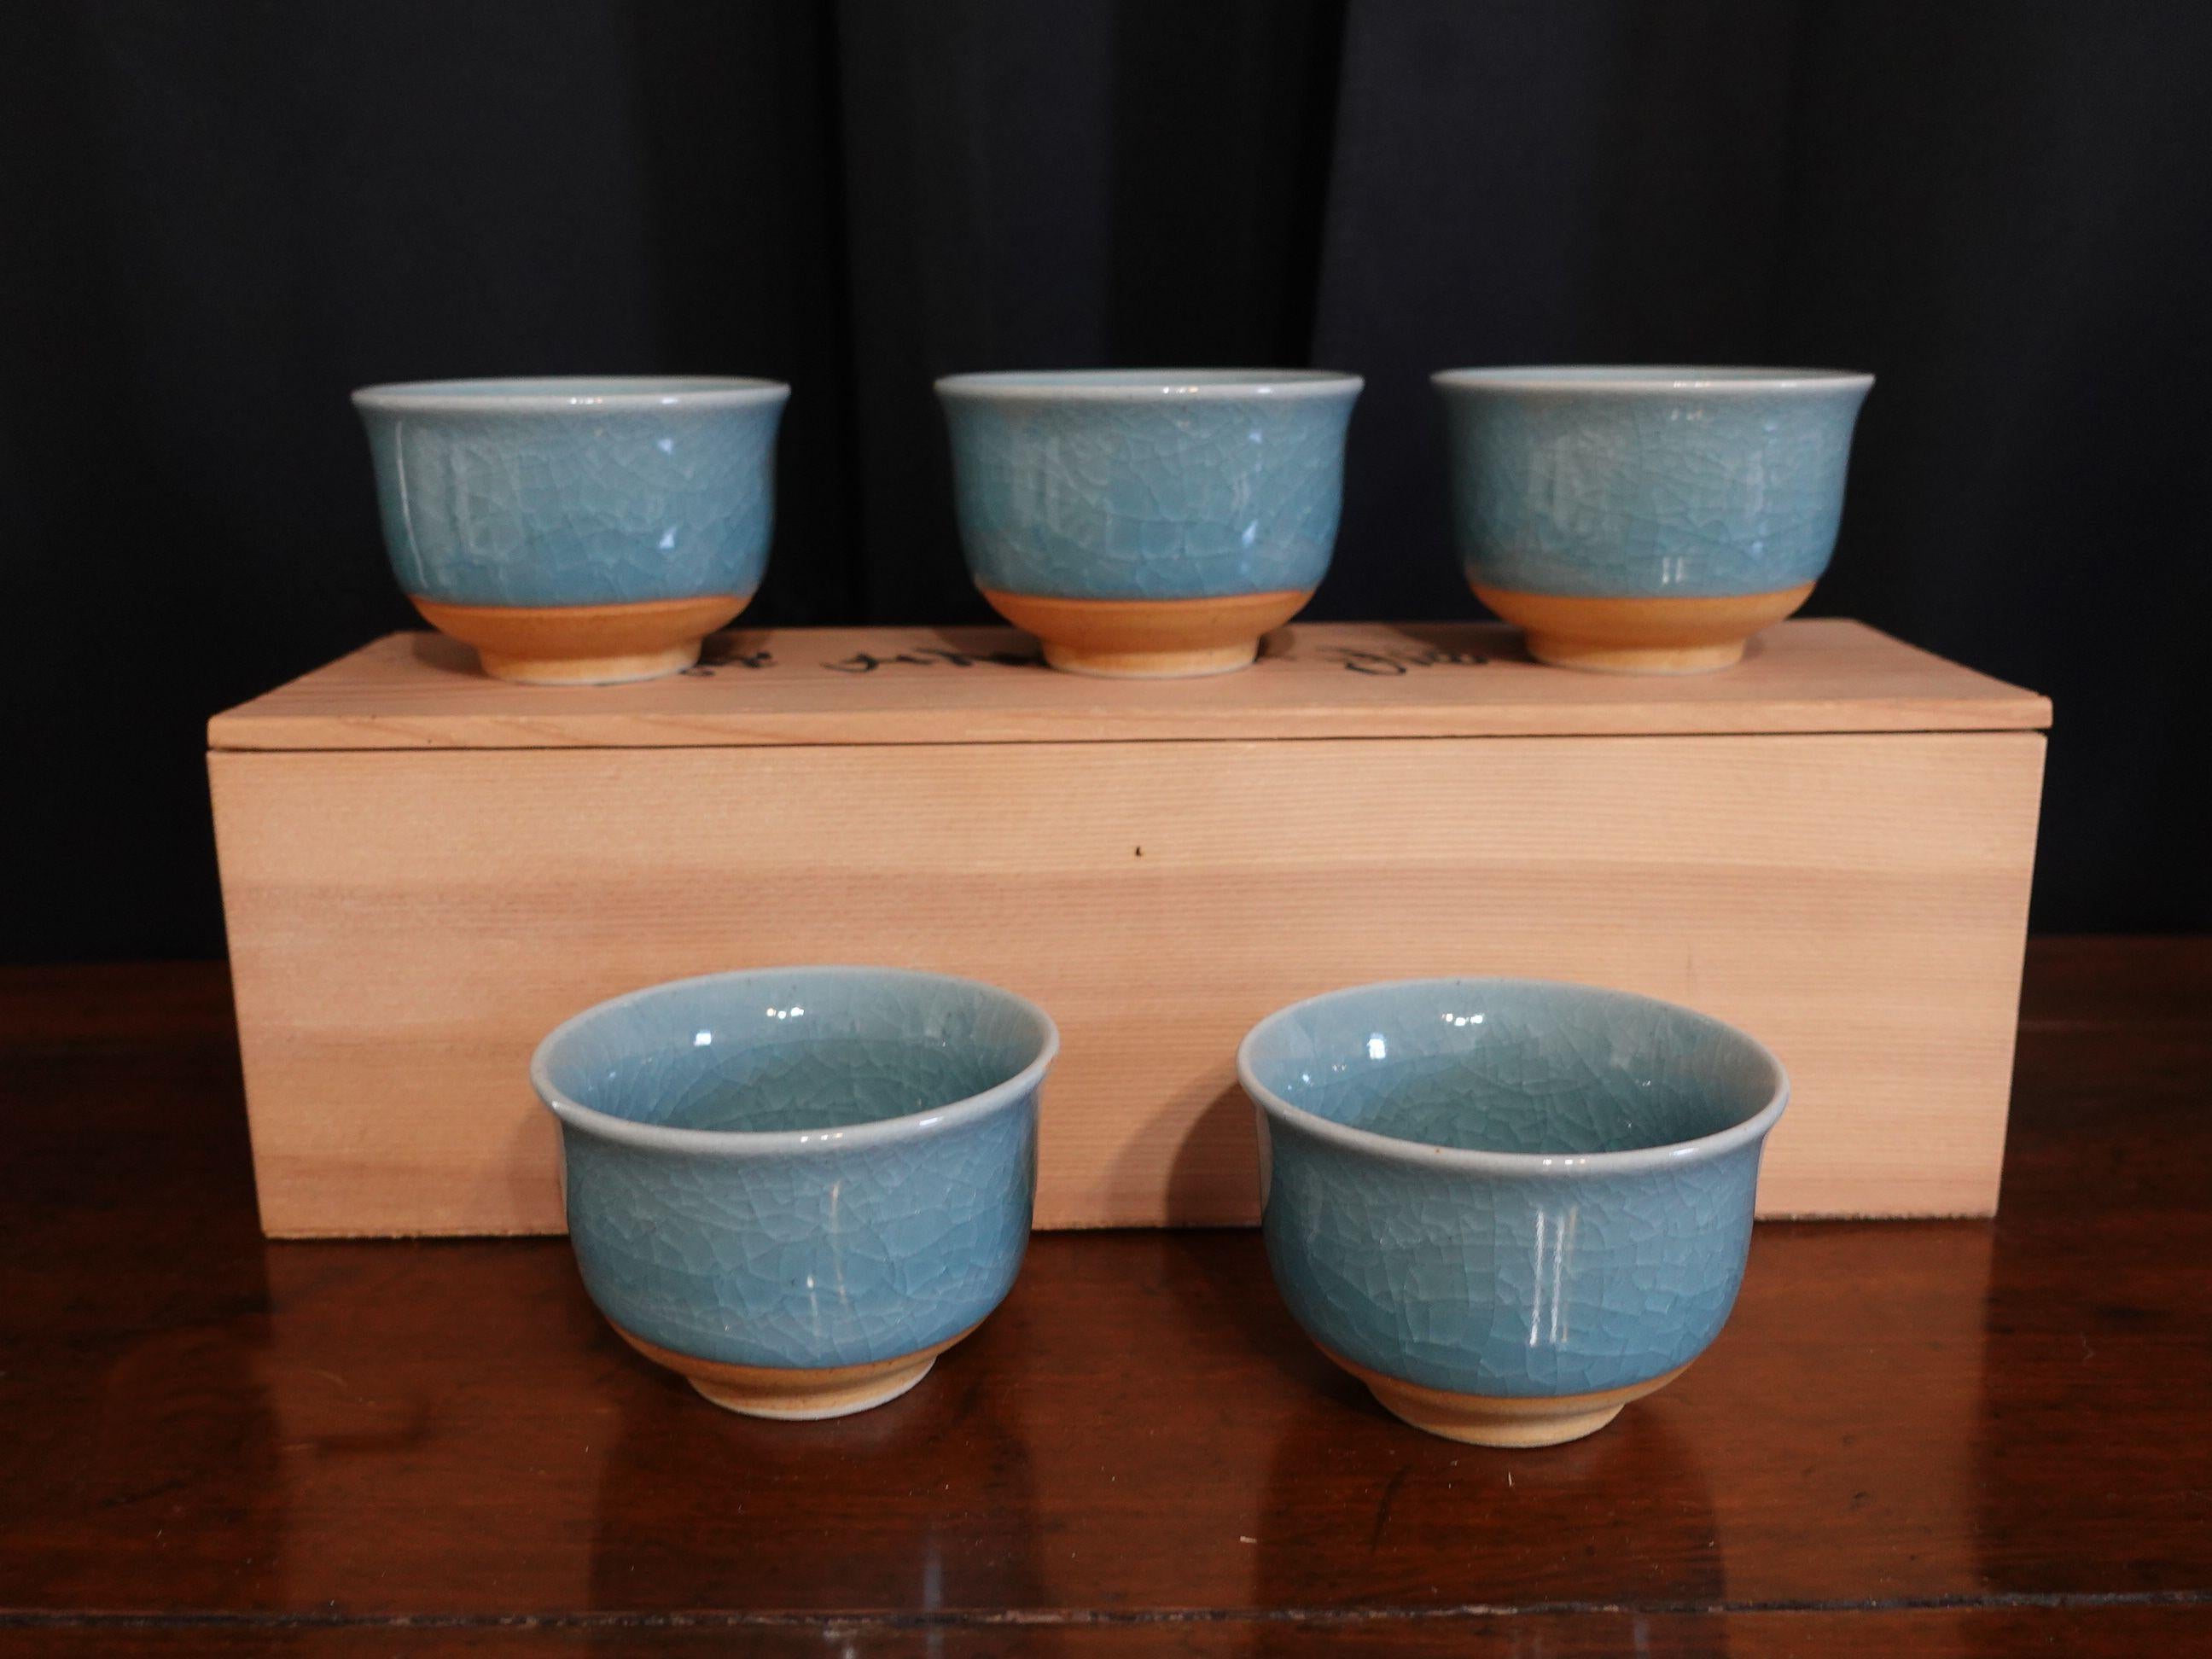 Old - Set of 5 Japanese Tajimi Teacups with light blue glazing.
Original box included with the seal

In good original new condition and just found in the warehouse, never used before.